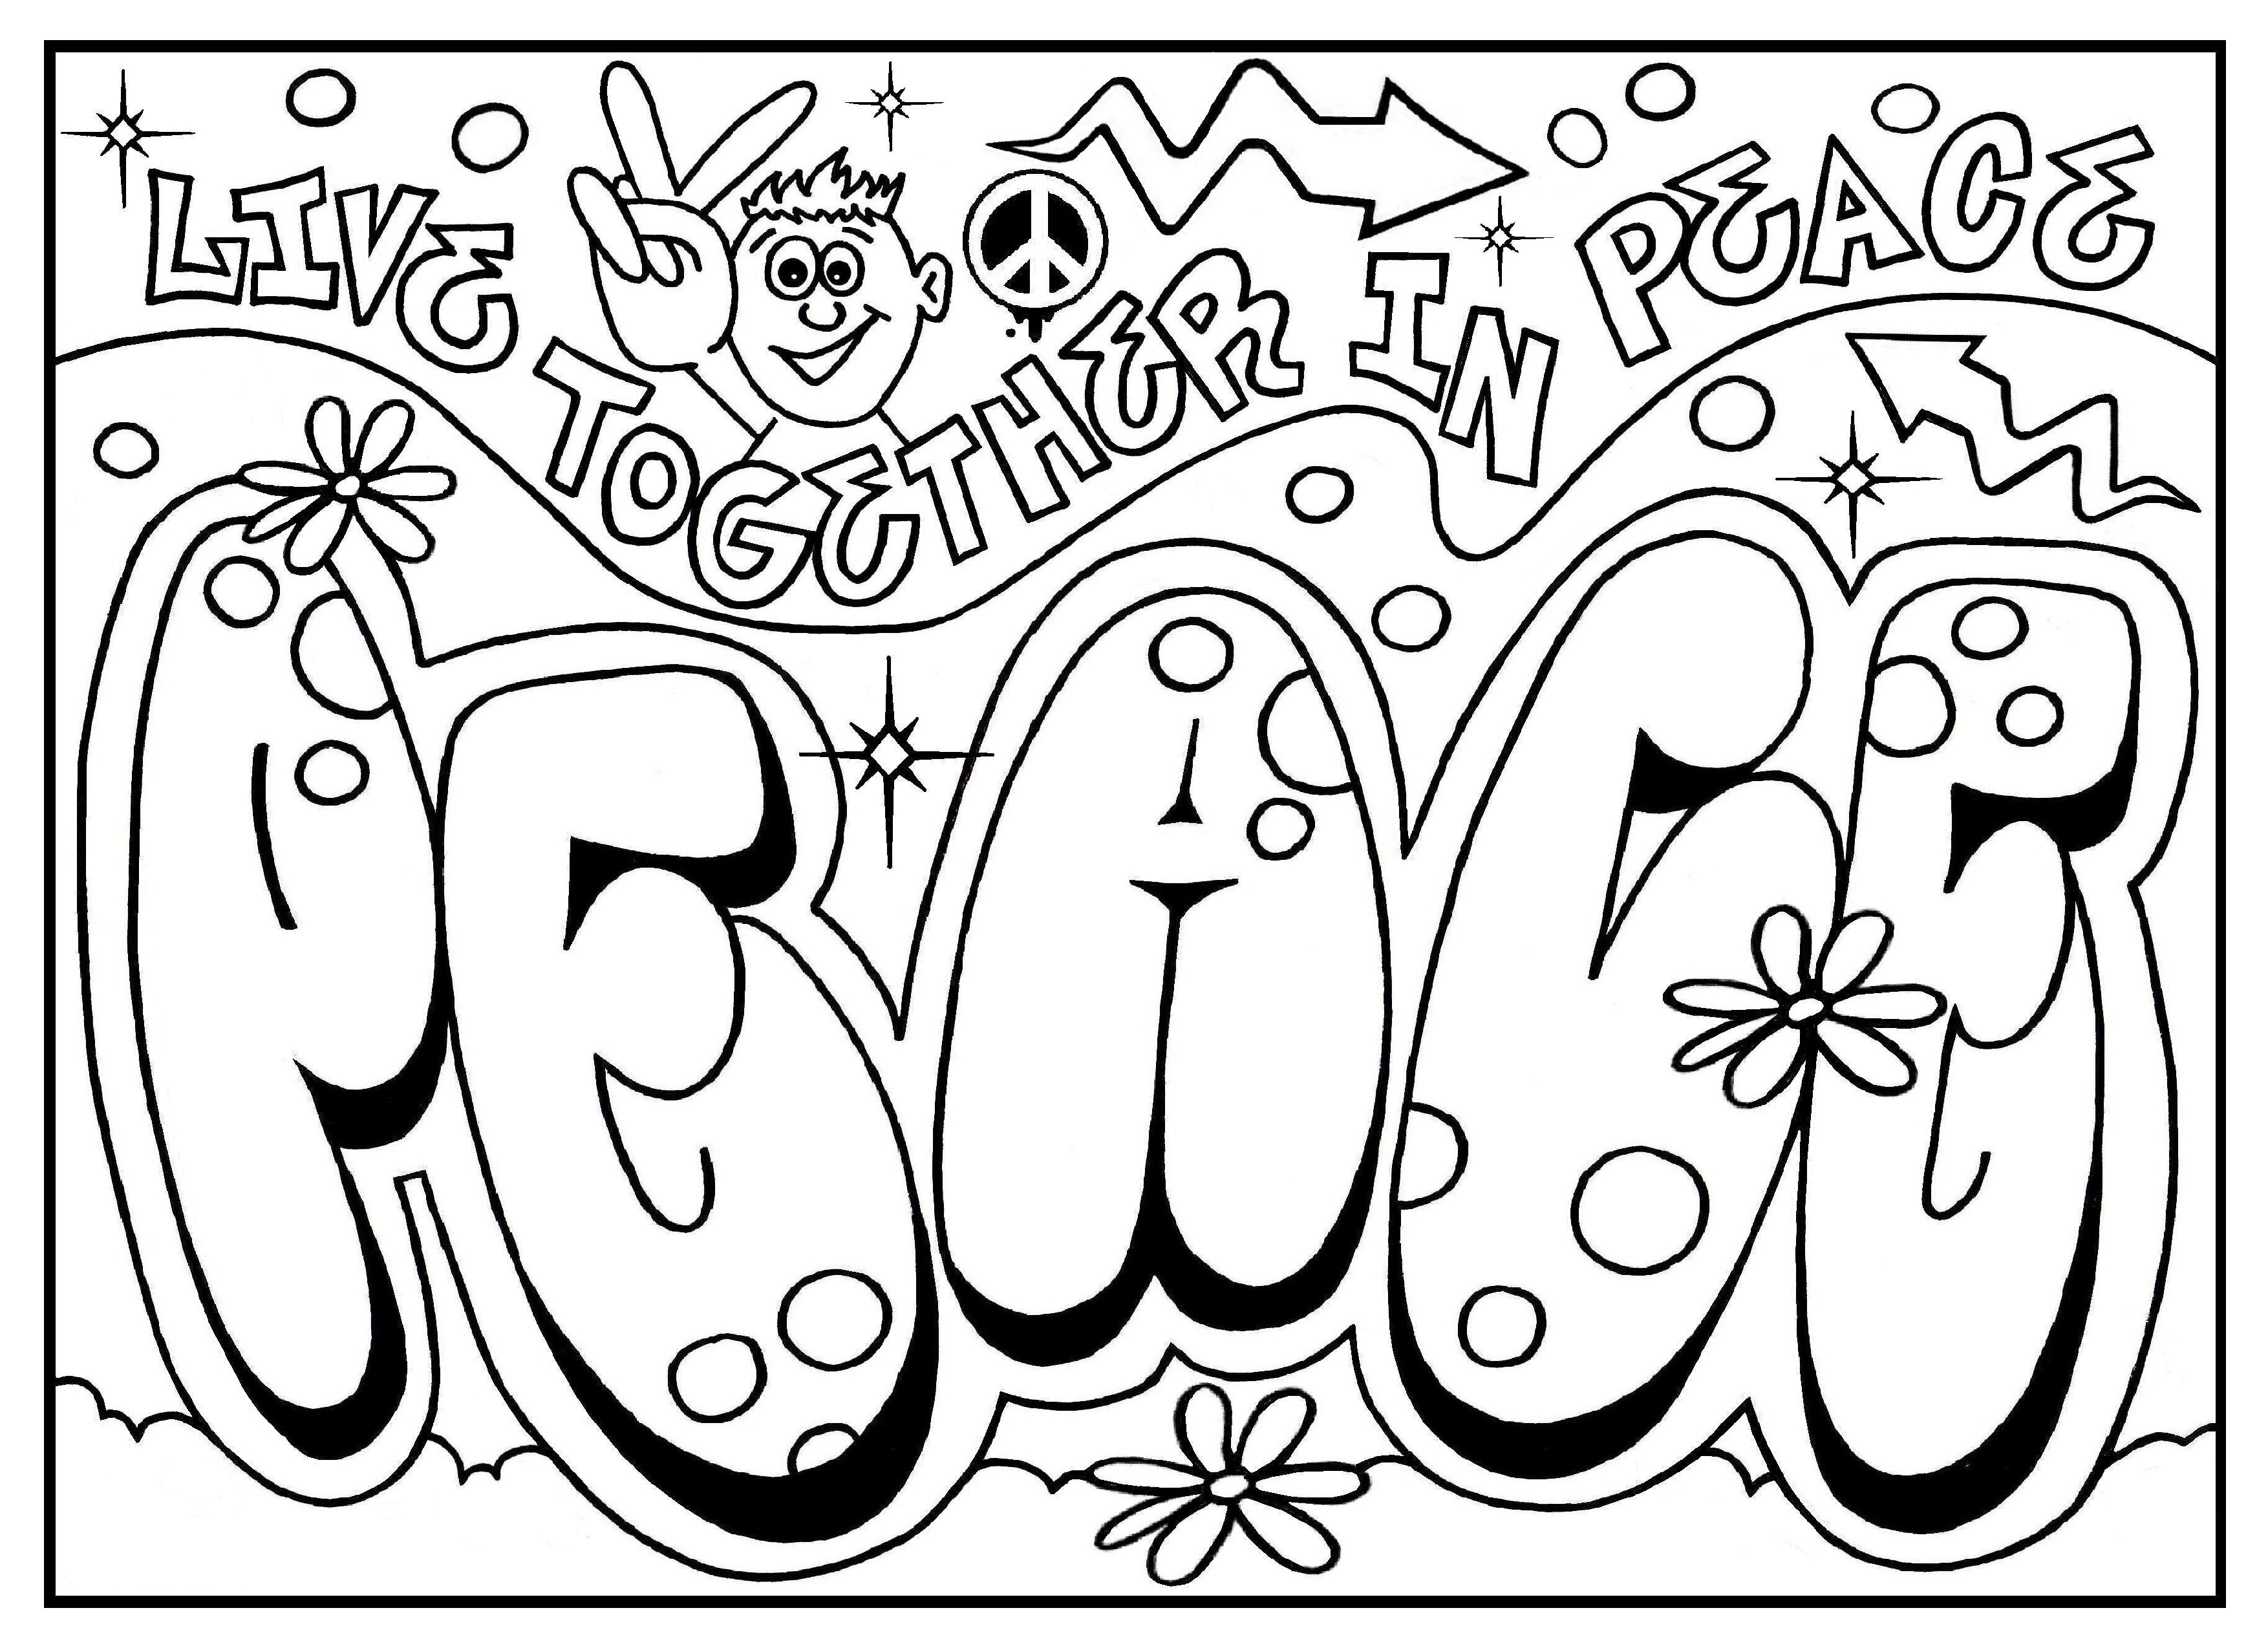 Graffiti Coloring Pages for Teens and Adults - Best Coloring Pages